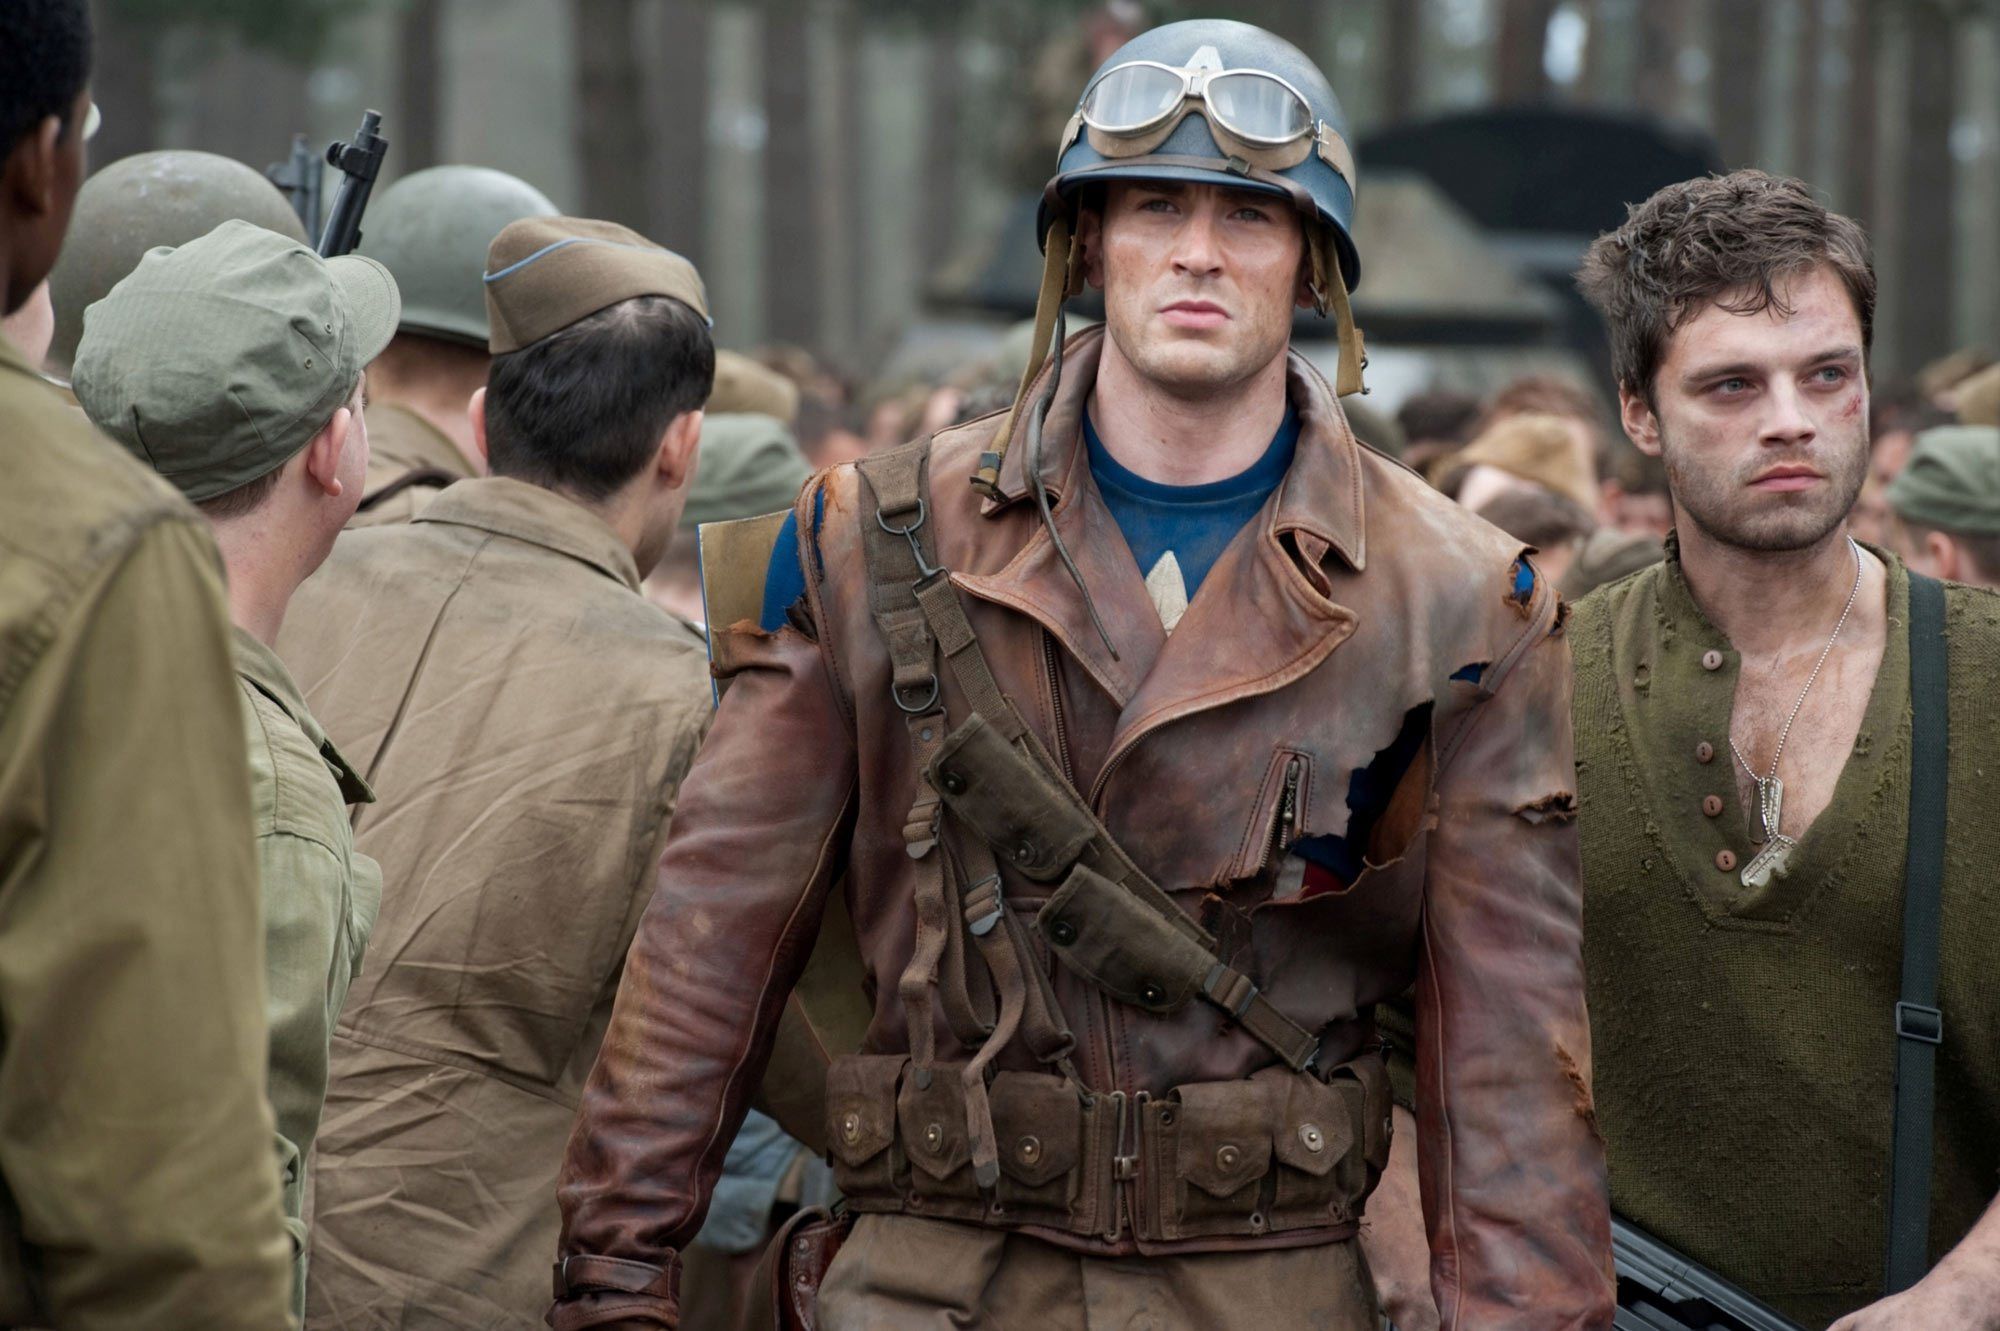 Captain America and Bucky Barnes in WWII